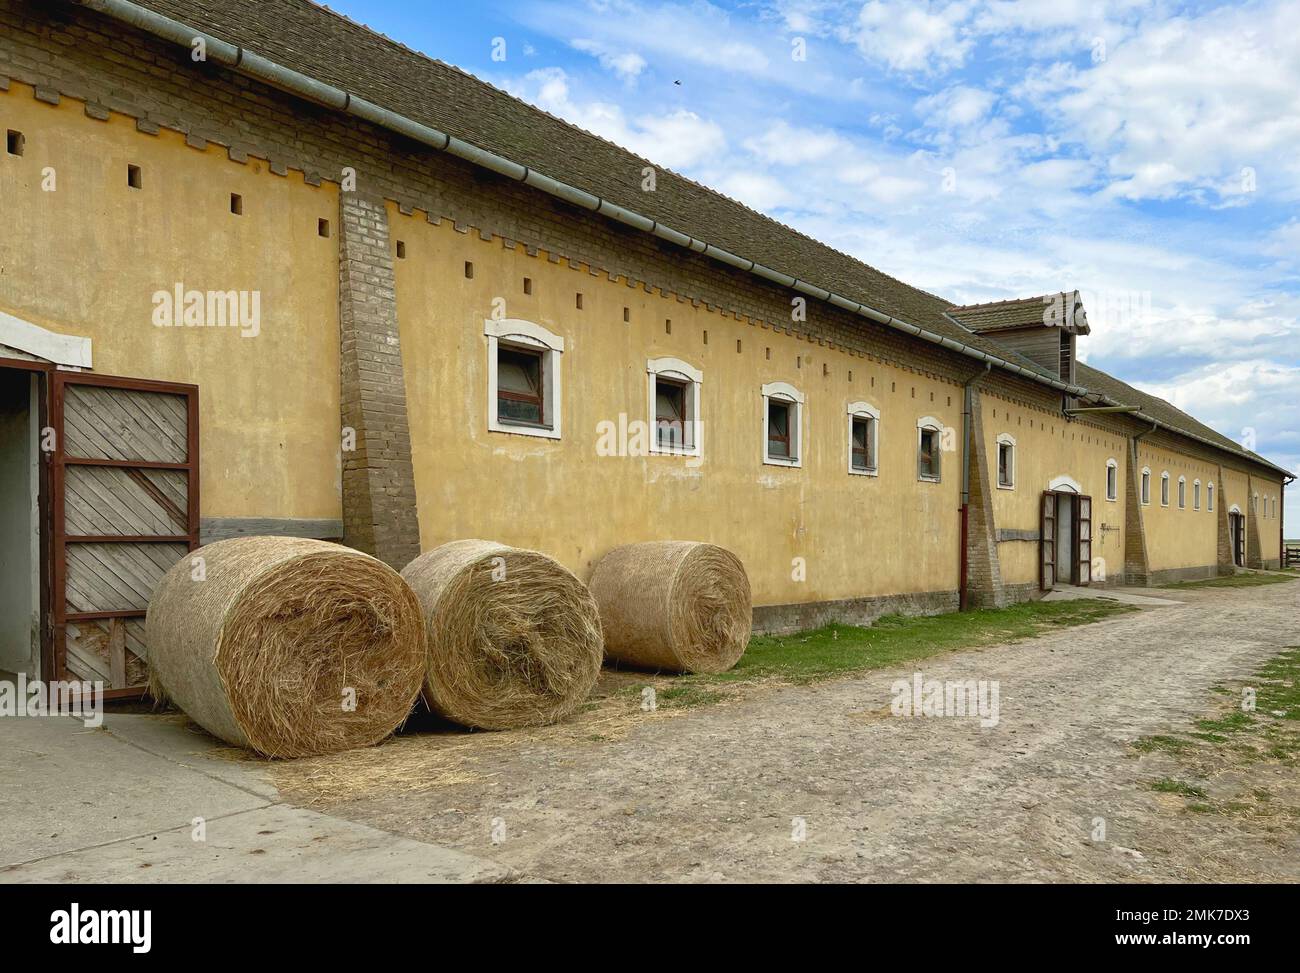 Magyar cowboy ranch is located in Dunapataj, Bács-Kiskun-Kiskun, Hungary, 60 miles from Budapest. Horse shows, demonstrations, wagon rides, and barns. Stock Photo